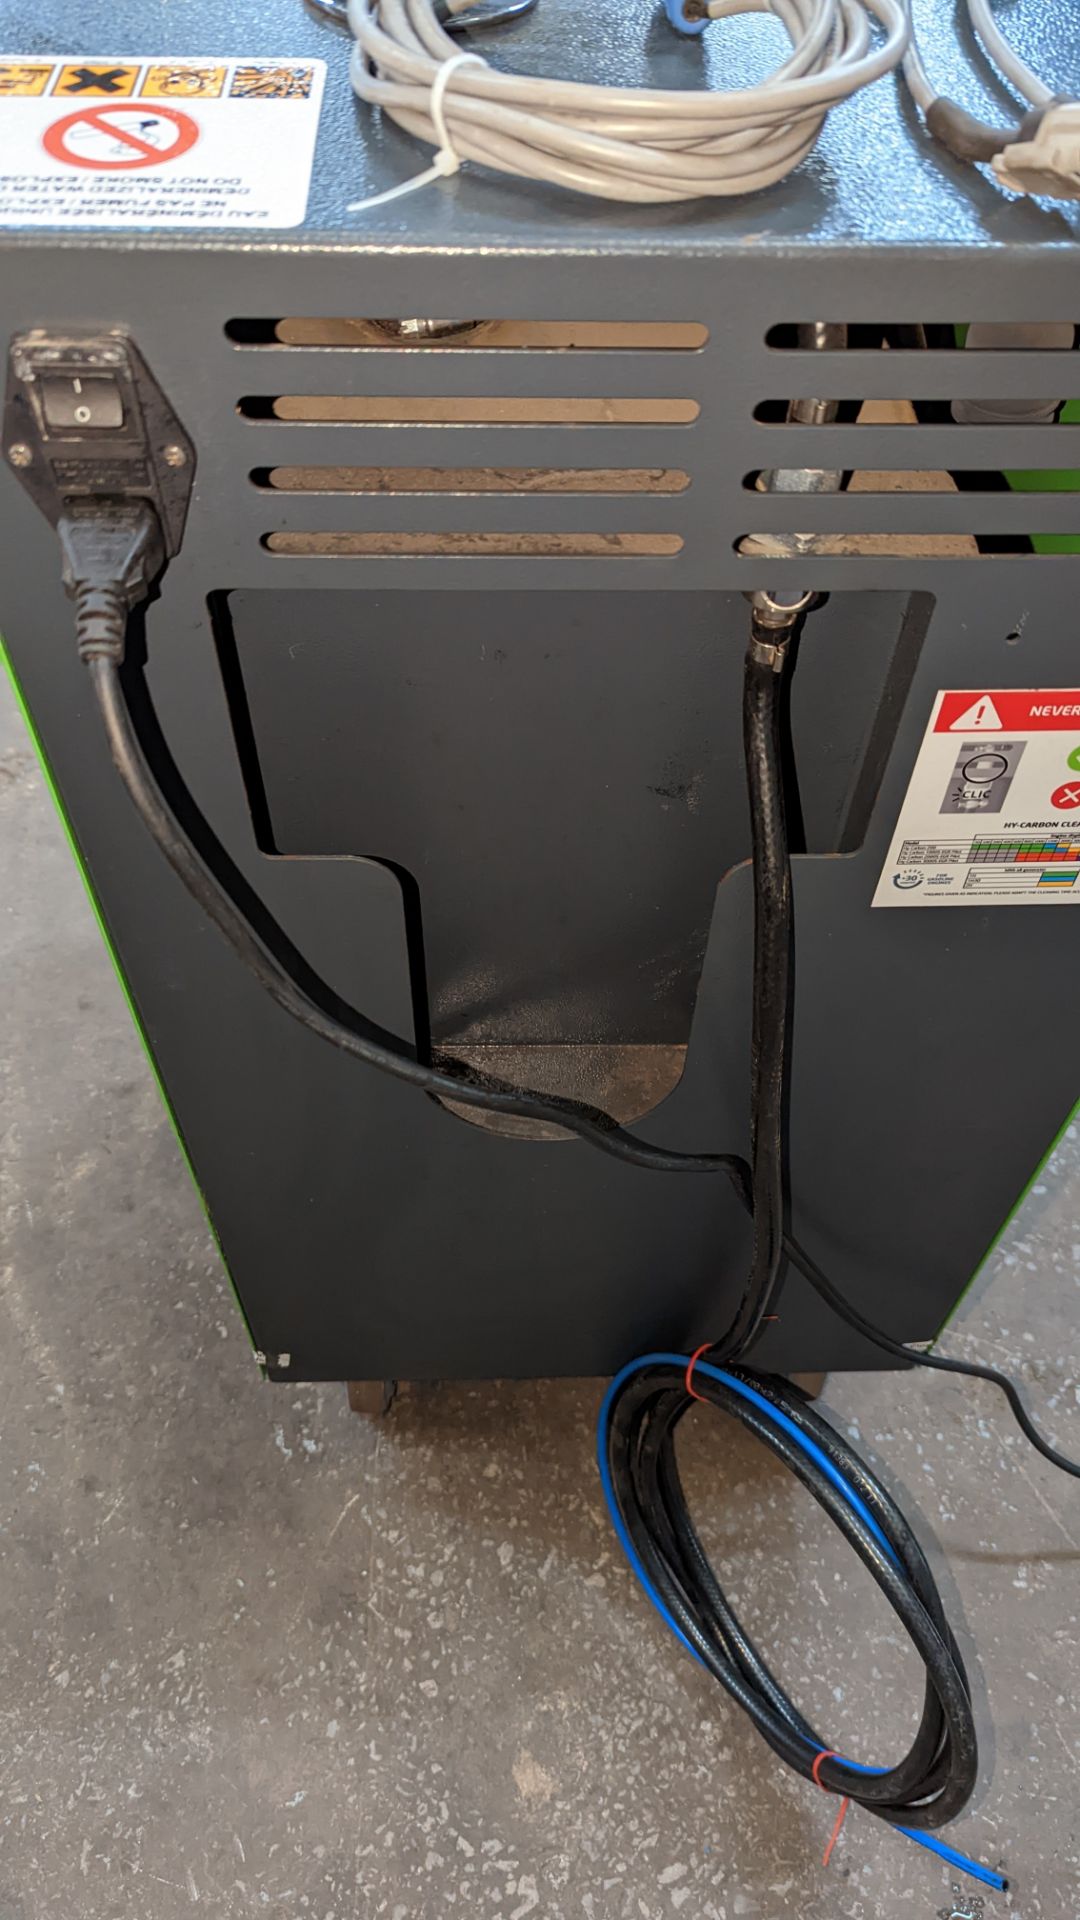 Flex Fuel Hy-Carbon EGR Pilot 1000S engine cleaning machine including cover. Purchased new in 2019 - Image 9 of 19